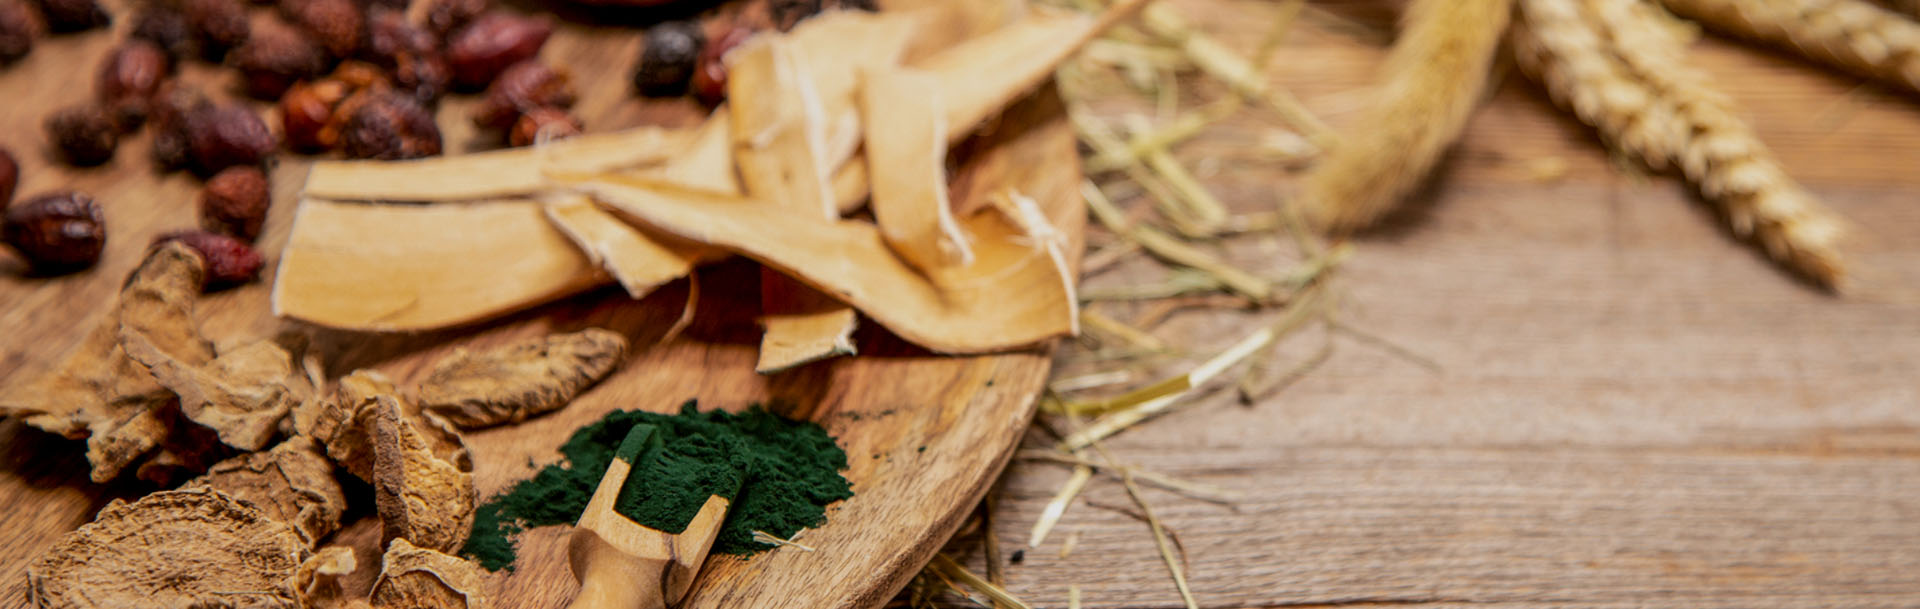 Dried bark, green spirulina powder, ears of grain and rose hips lie on a wooden table